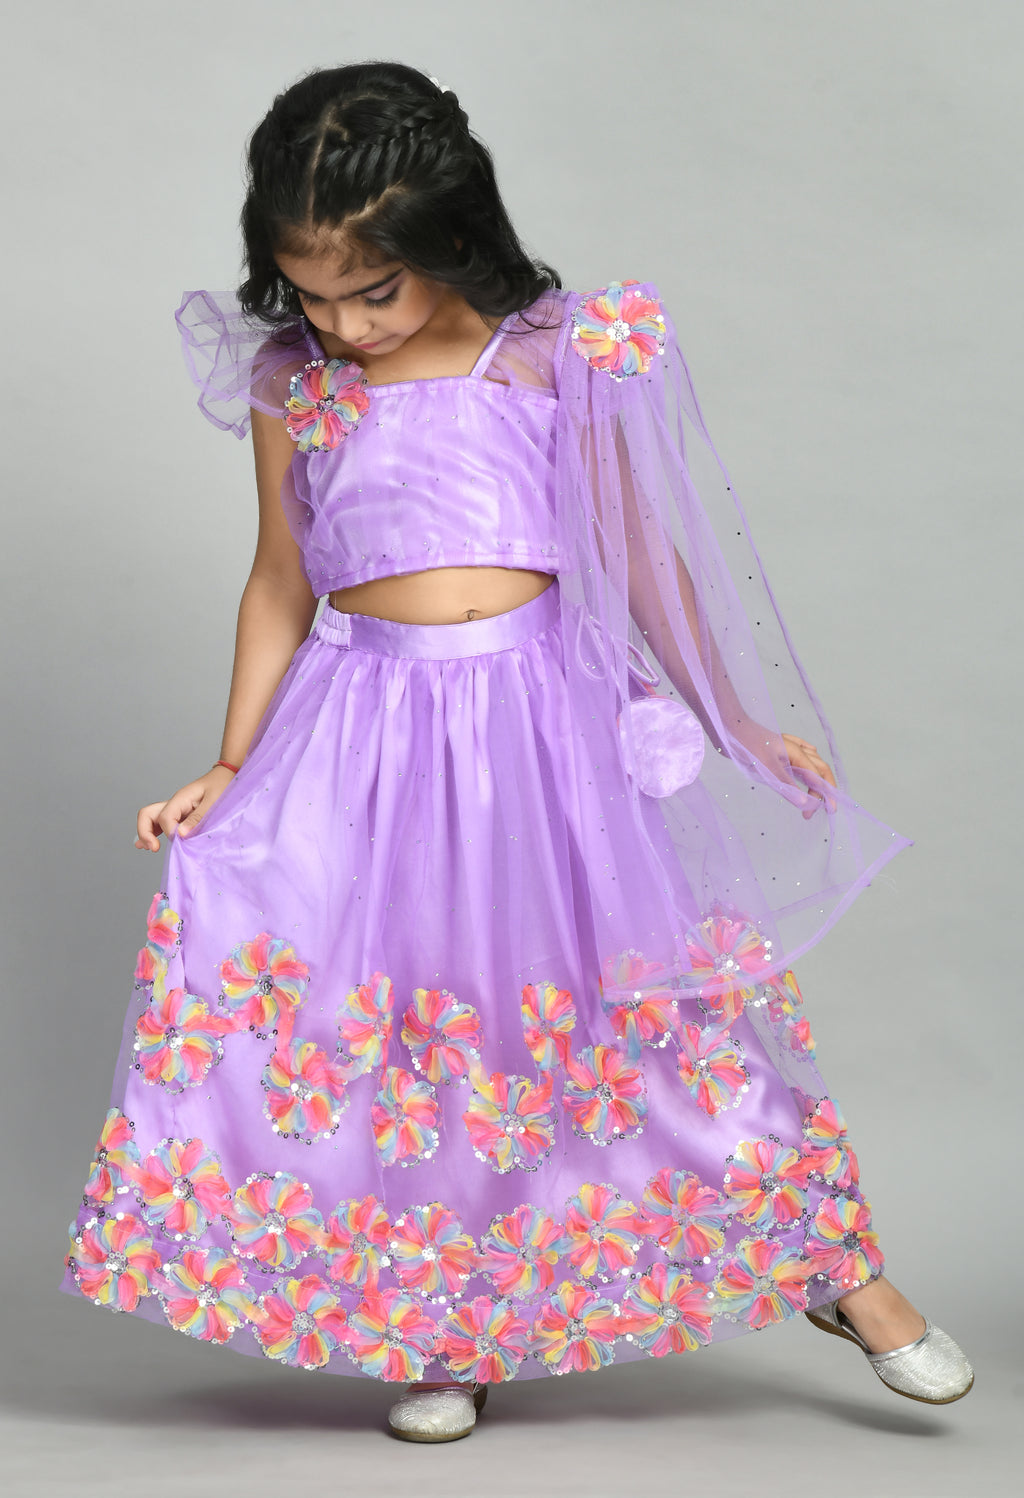 Baby in Pattu pavadai/pattu langa multicolour georgette langa paired with  floral blouse | Kids designer dresses, Baby frocks designs, Kids' dresses